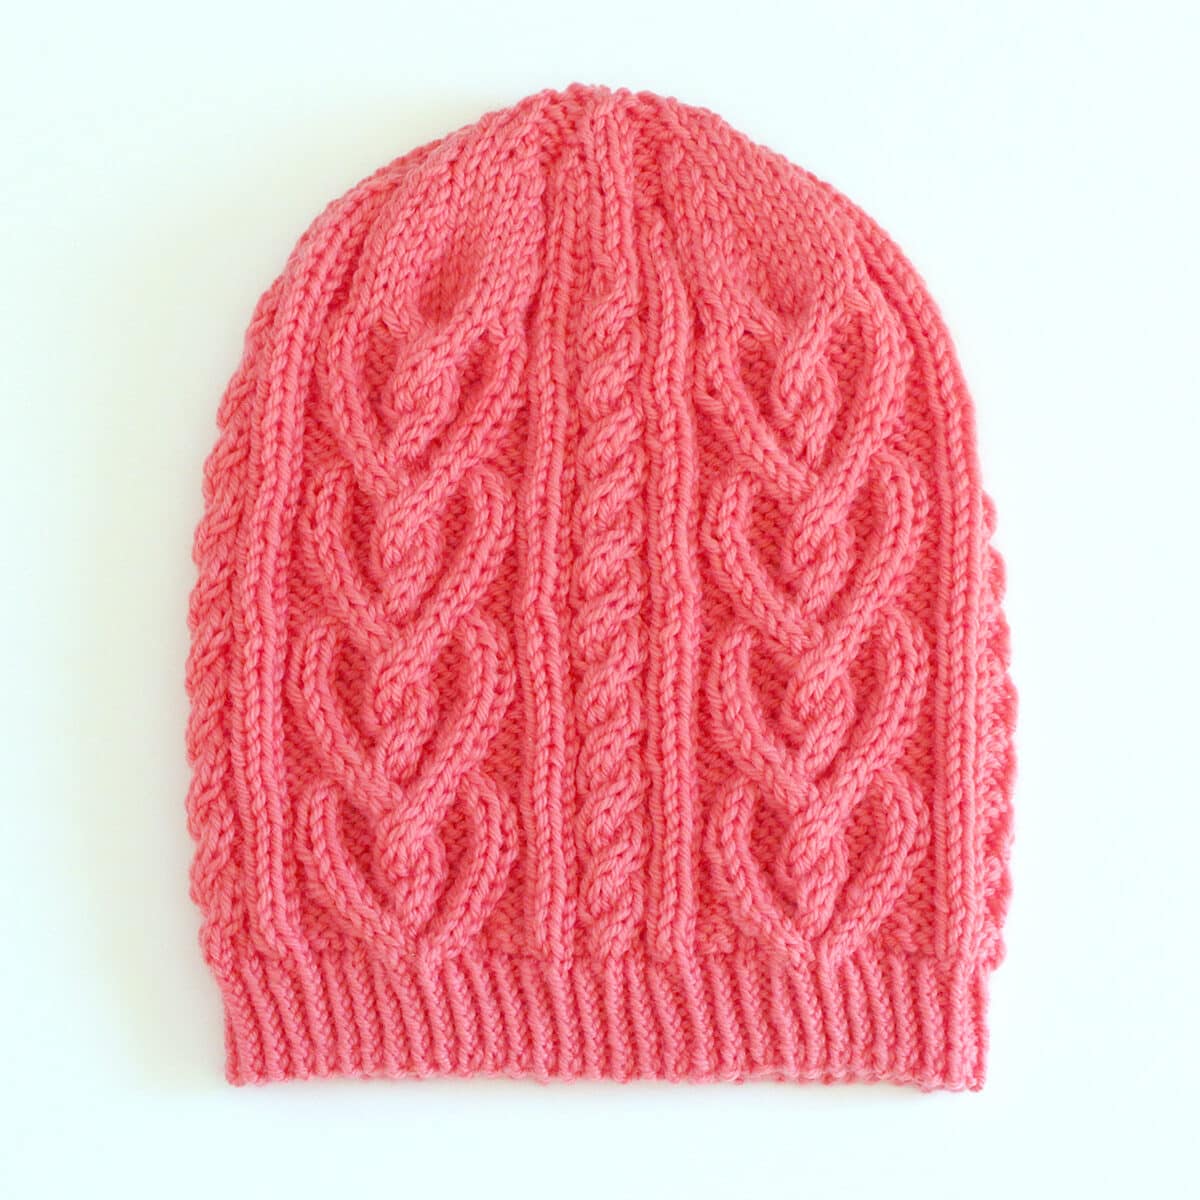 Finished knitted Heart Cable Hat in orange yarn color.